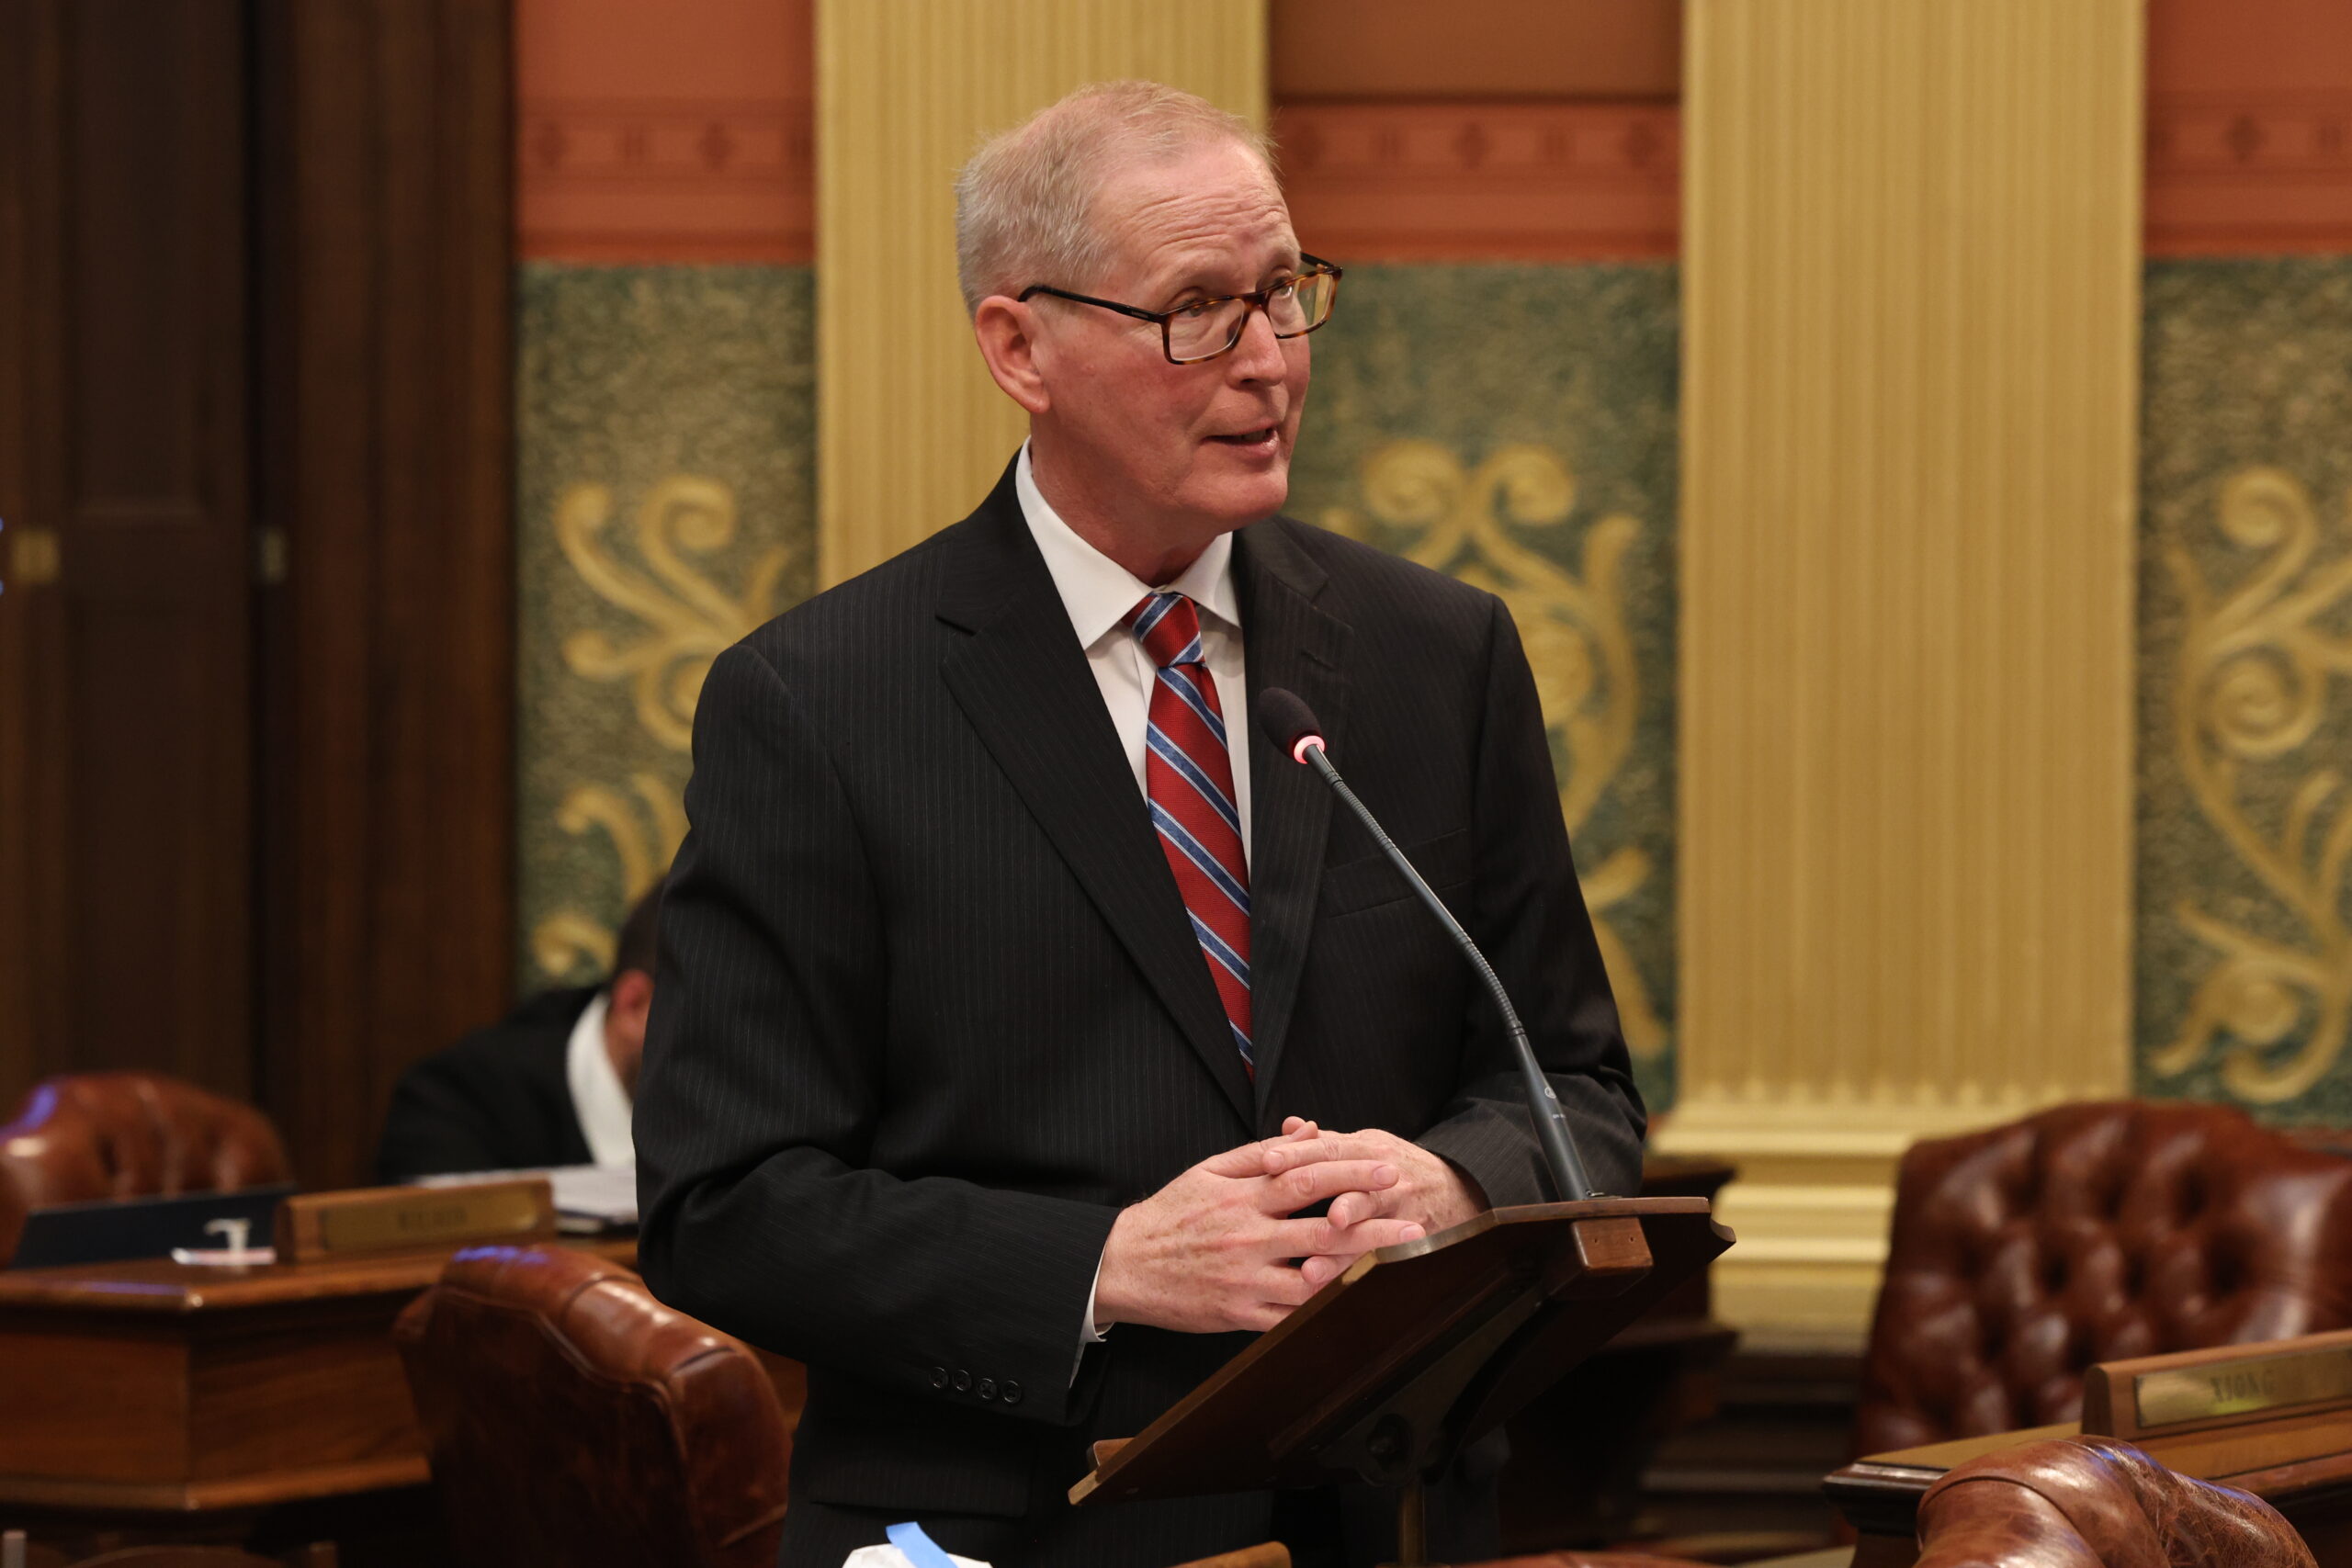 Michigan state Representative Jim Haadsma speaks in support of a budget amendment on the floor of the Michigan House of Representatives.